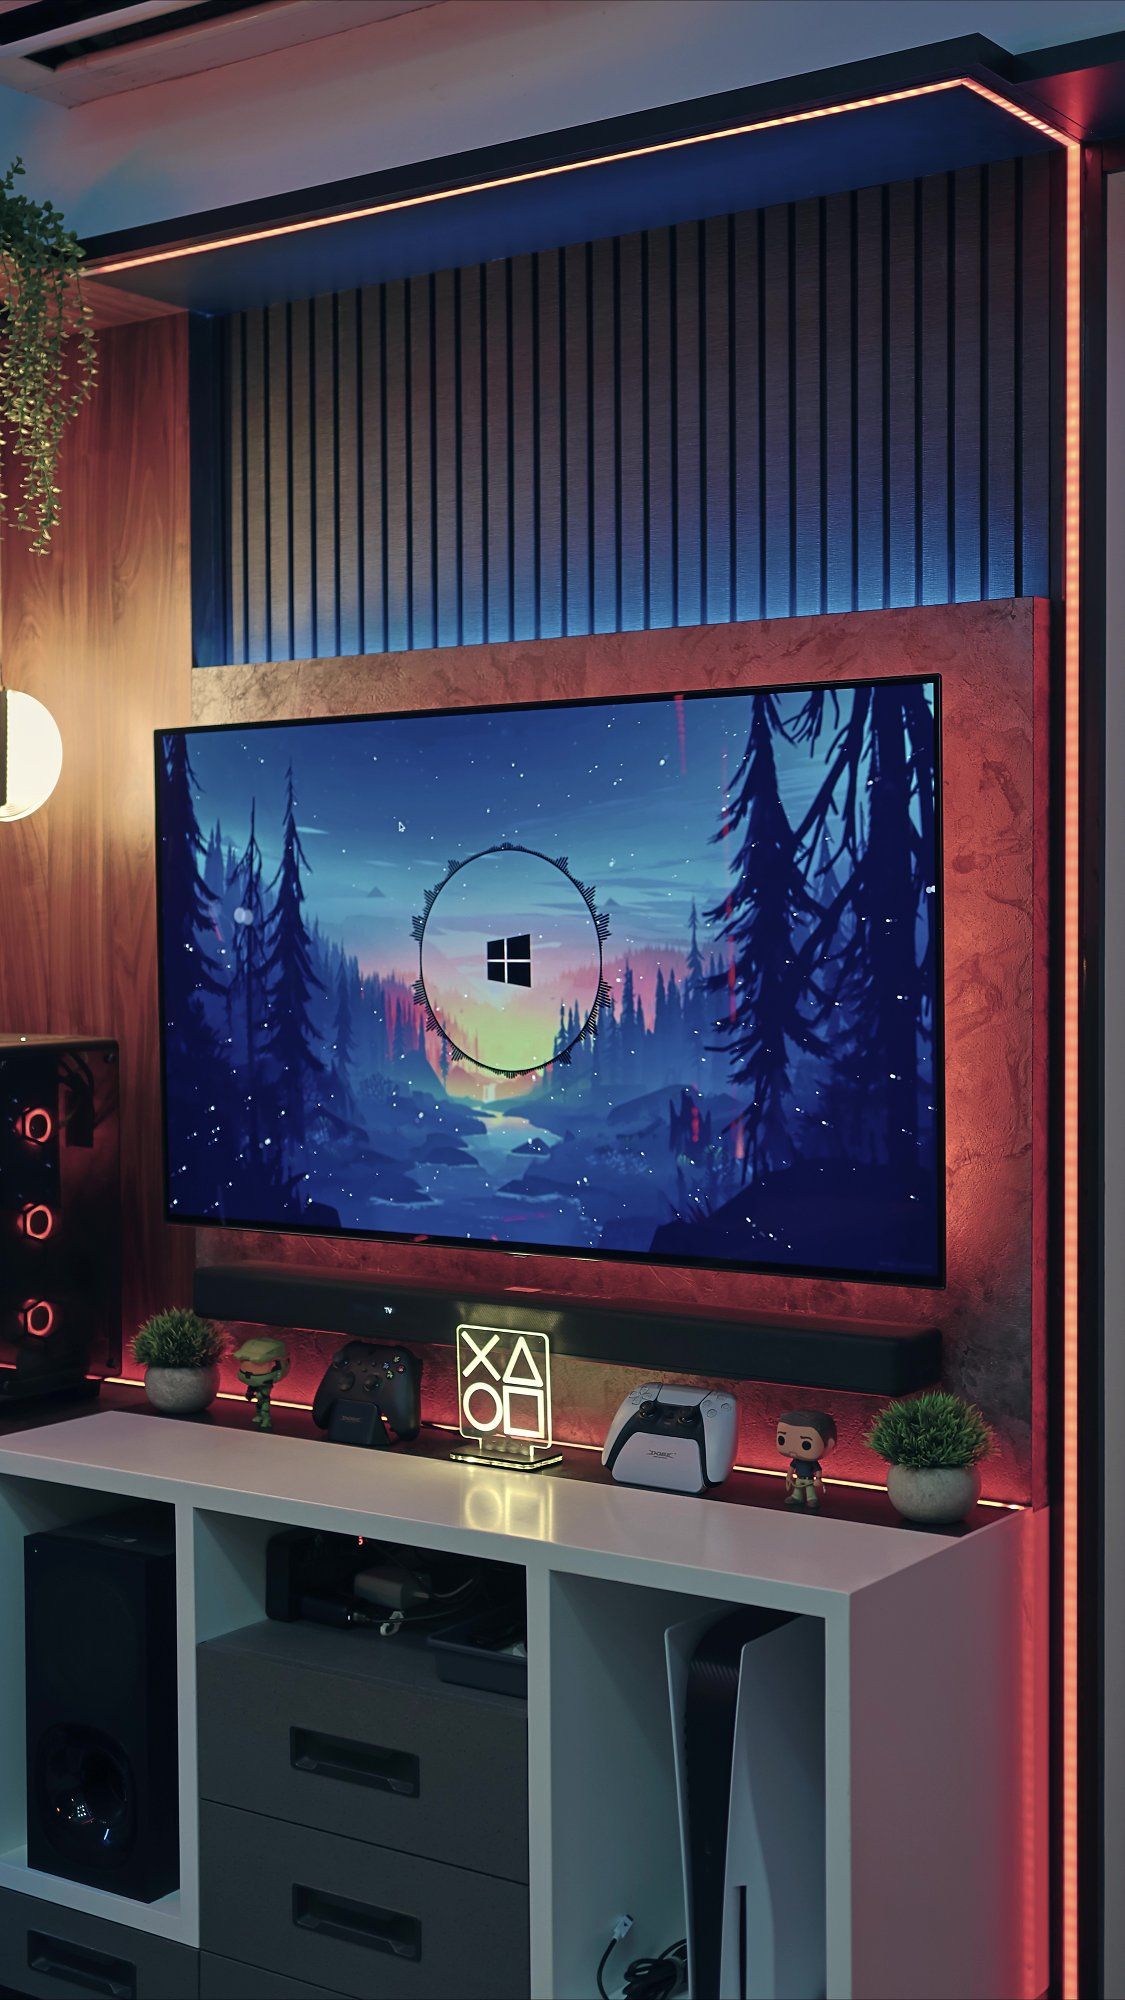 An LG OLED Smart TV and a PlayStation icons light